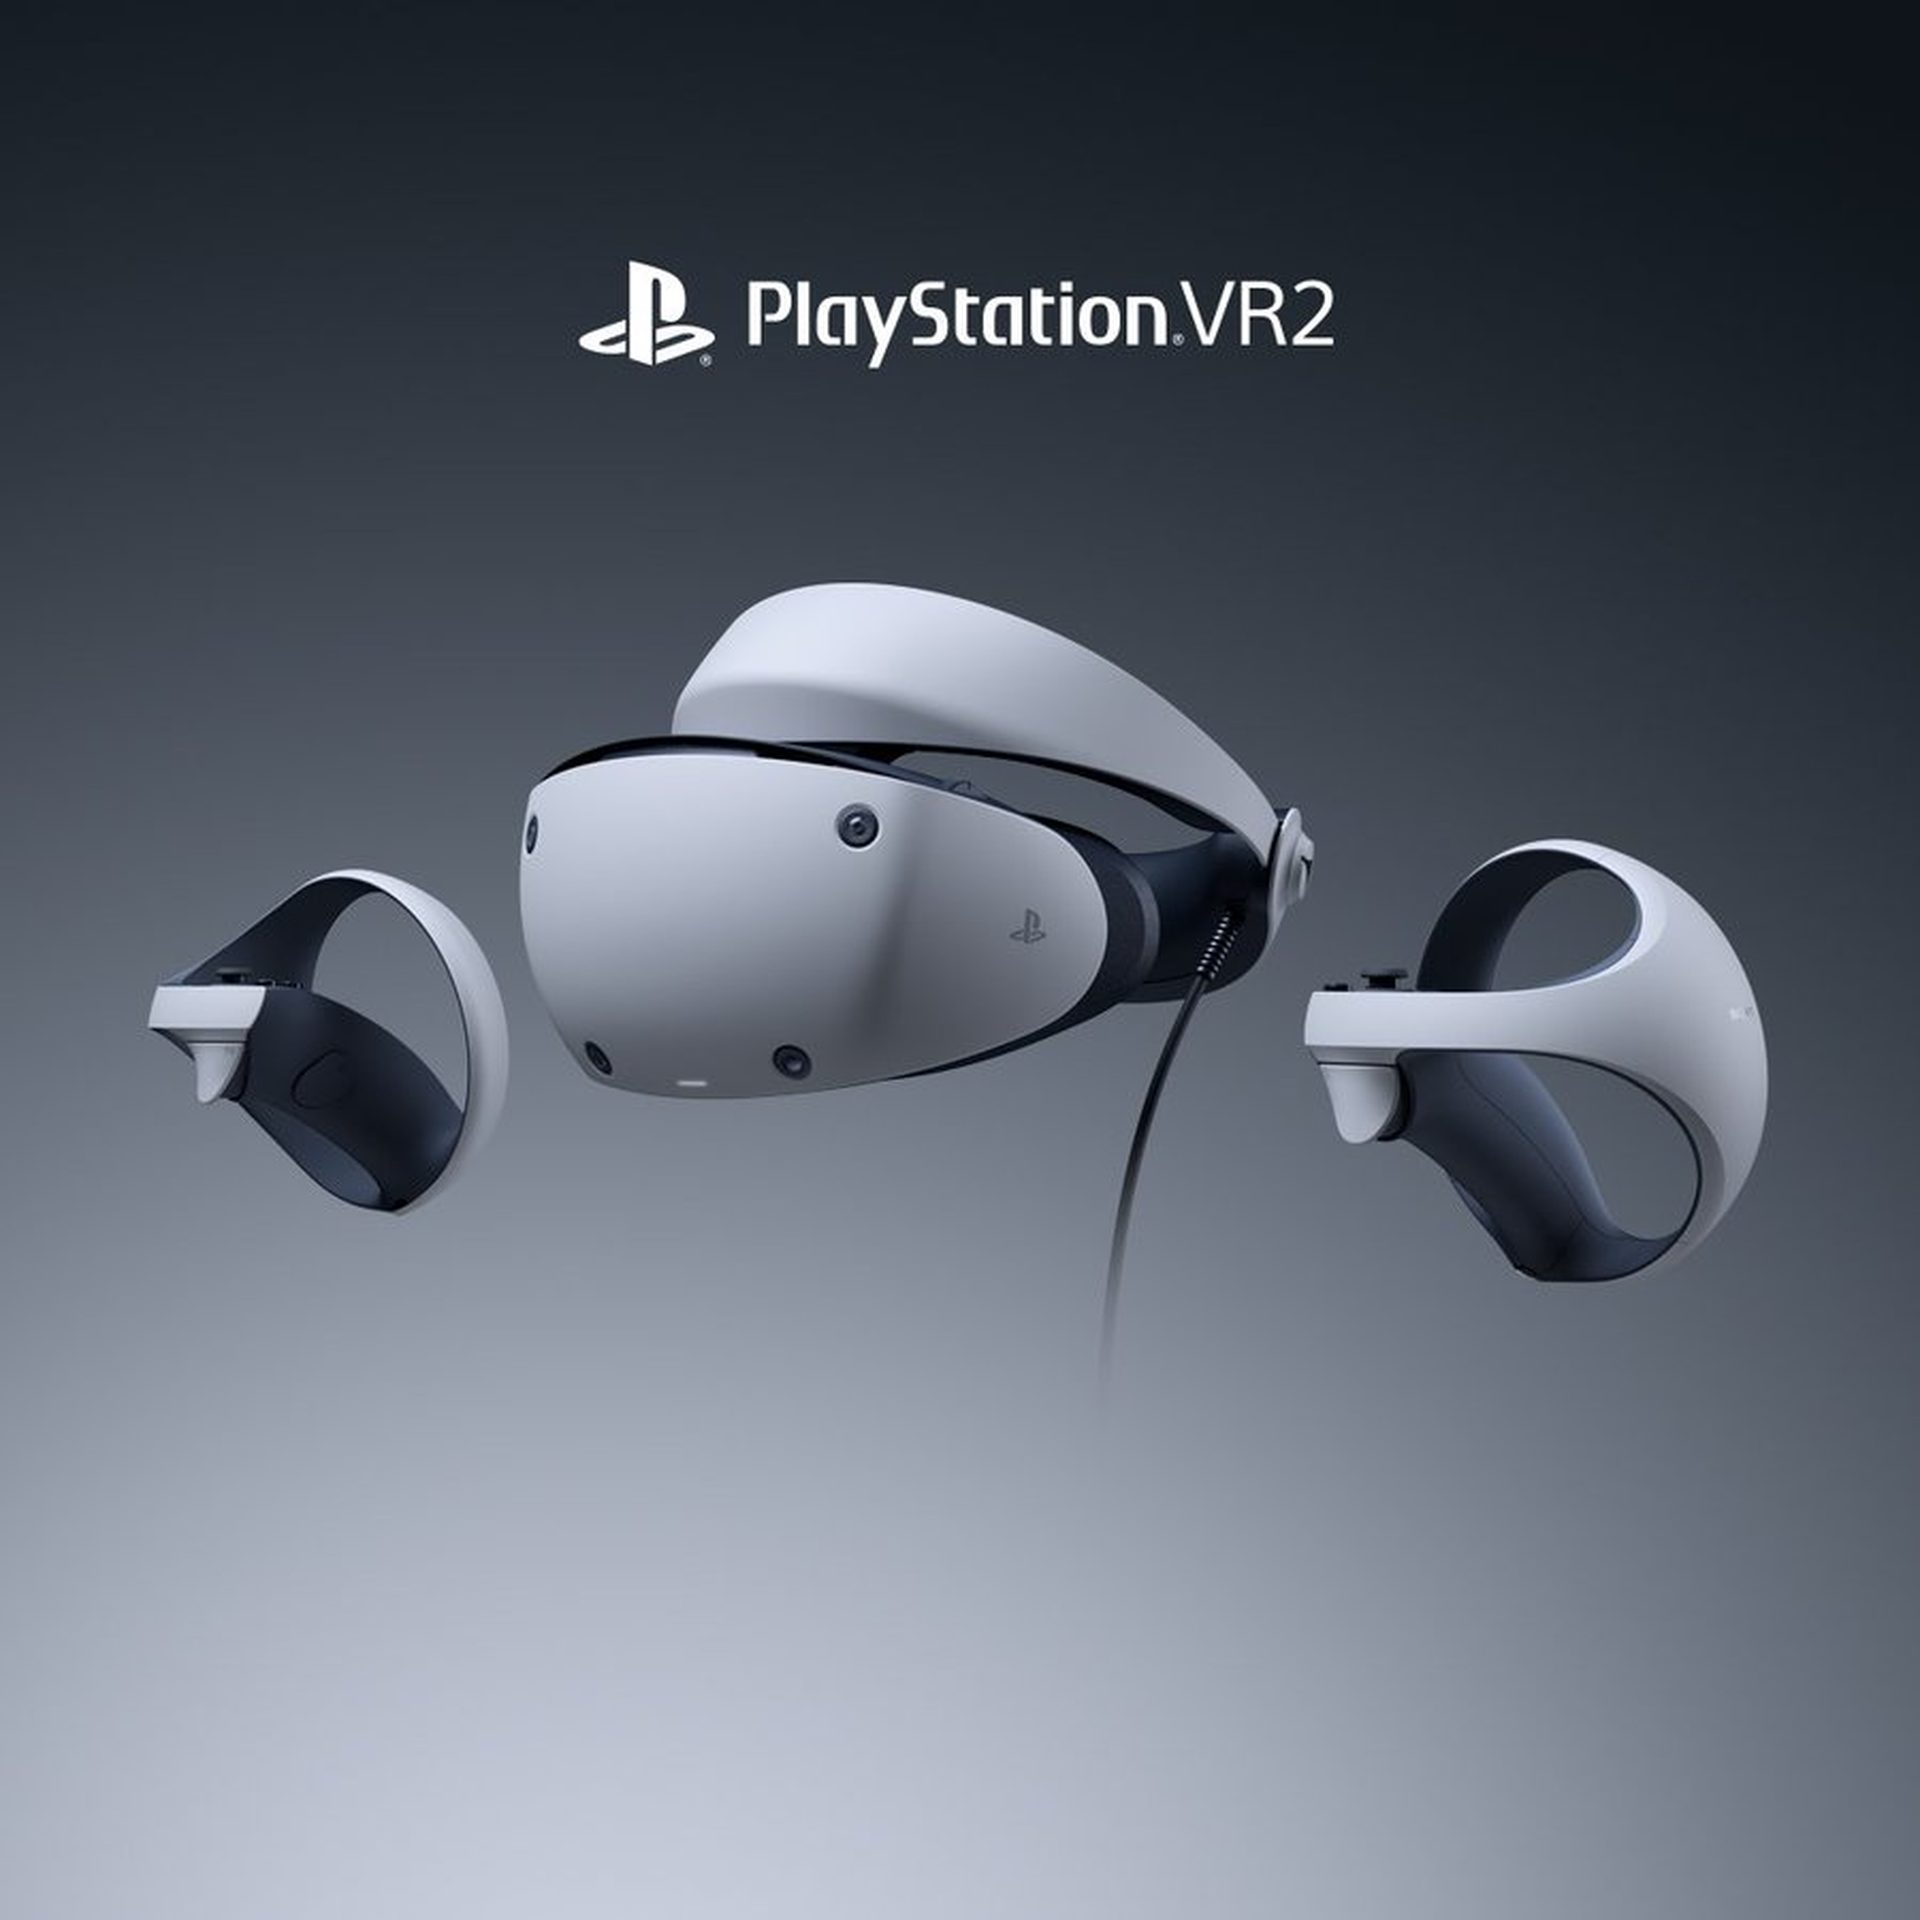 PlayStation VR2 price, pre-order, and release date